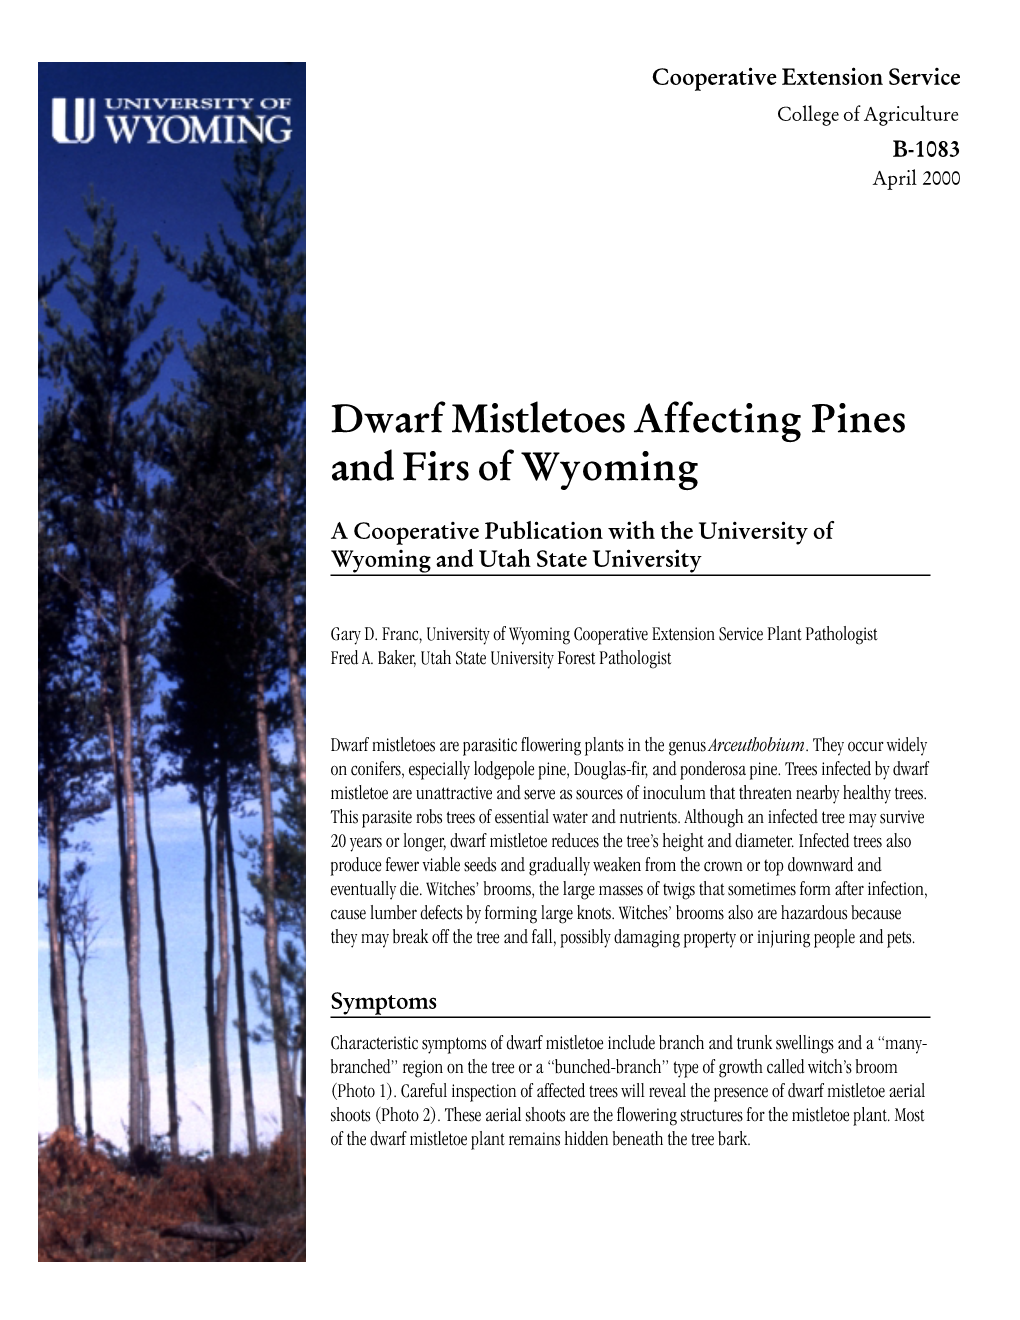 Dwarf Mistletoes Affecting Pines and Firs of Wyoming